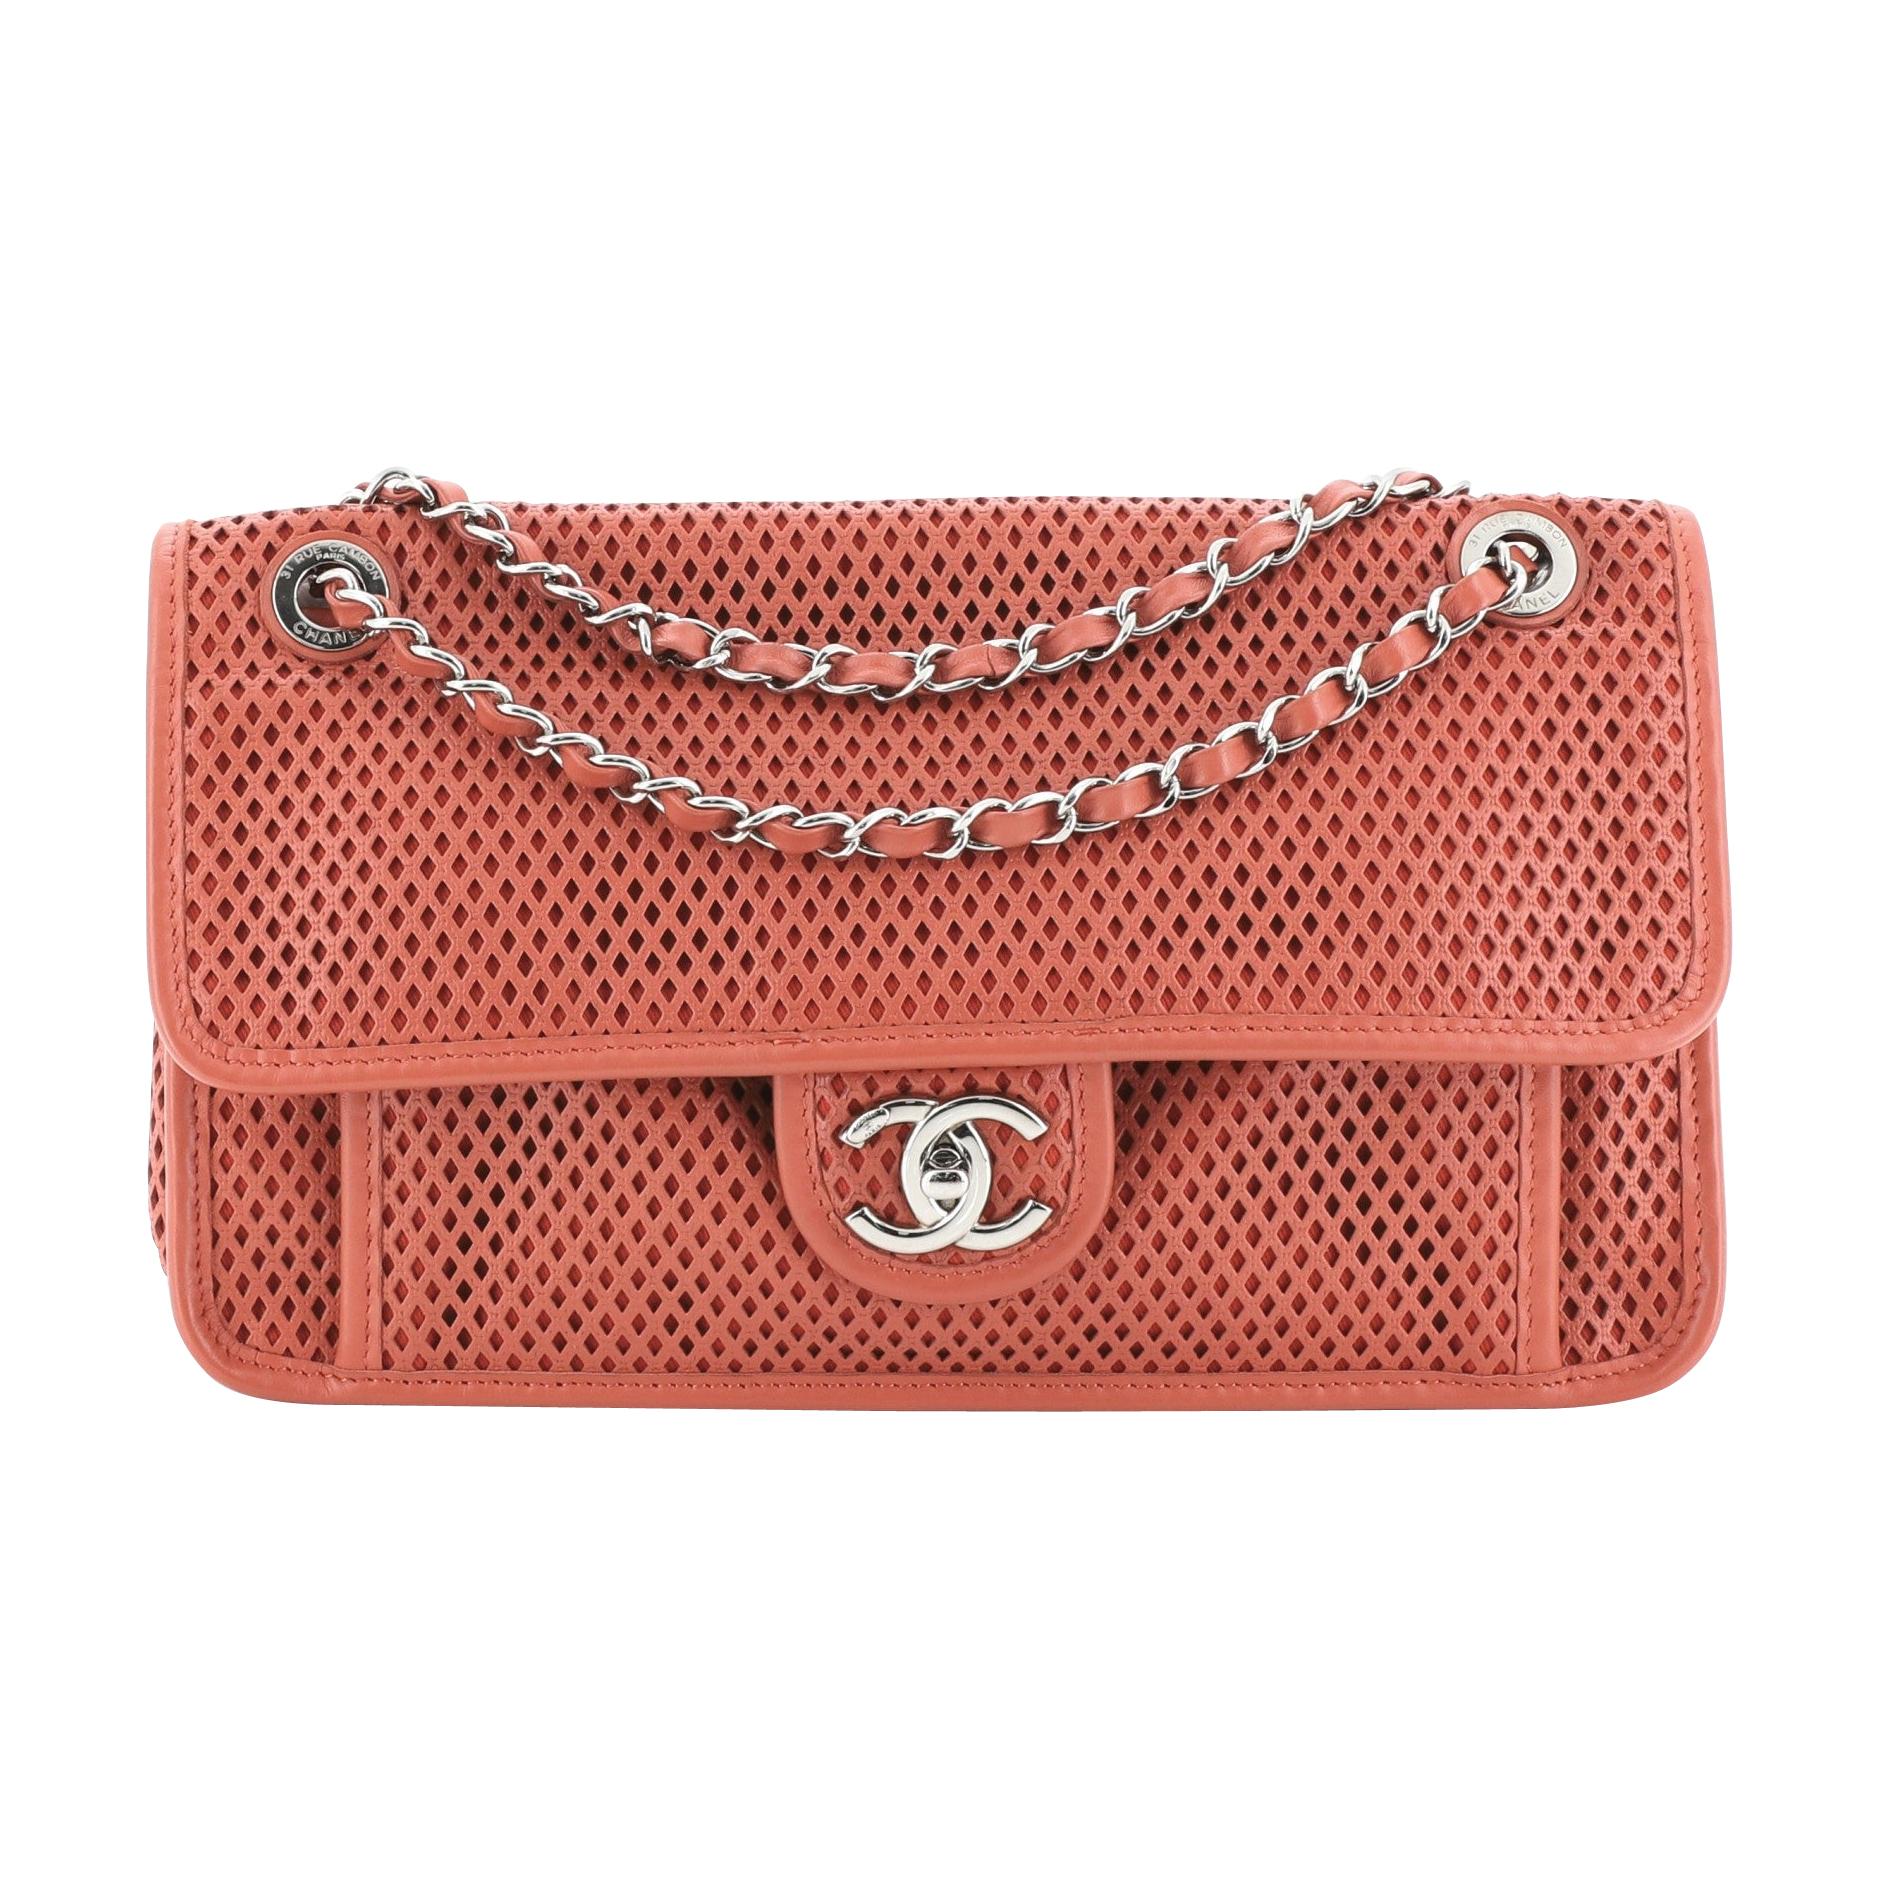 Chanel Up In The Air Flap Bag Perforated Leather Medium 